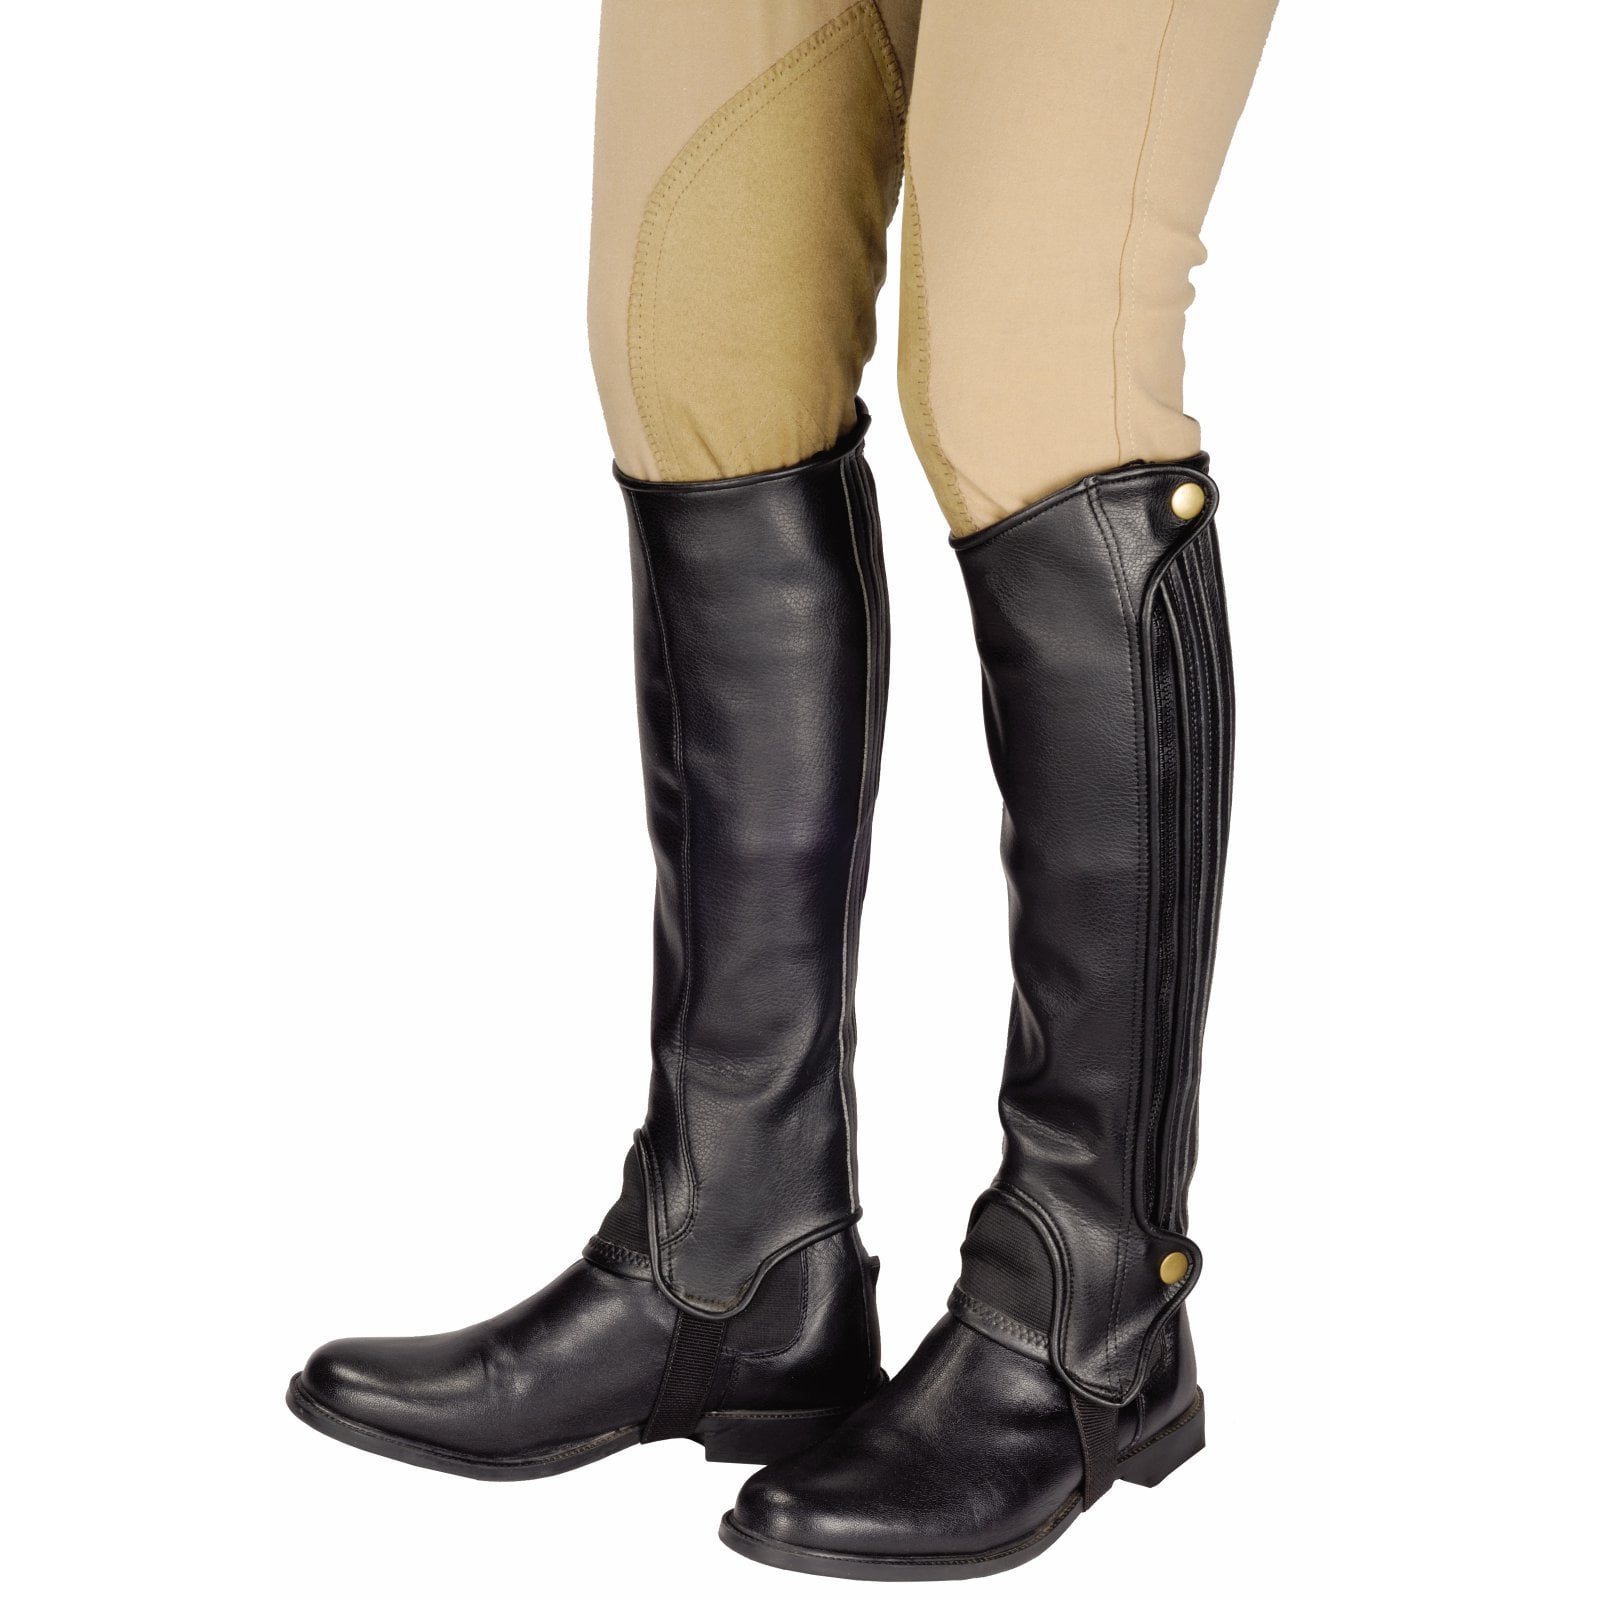 ADULTS HALF CHAPS BROWN TOP QUALITY FULL GRAIN COWHIDE LEATHER-ALL SIZES